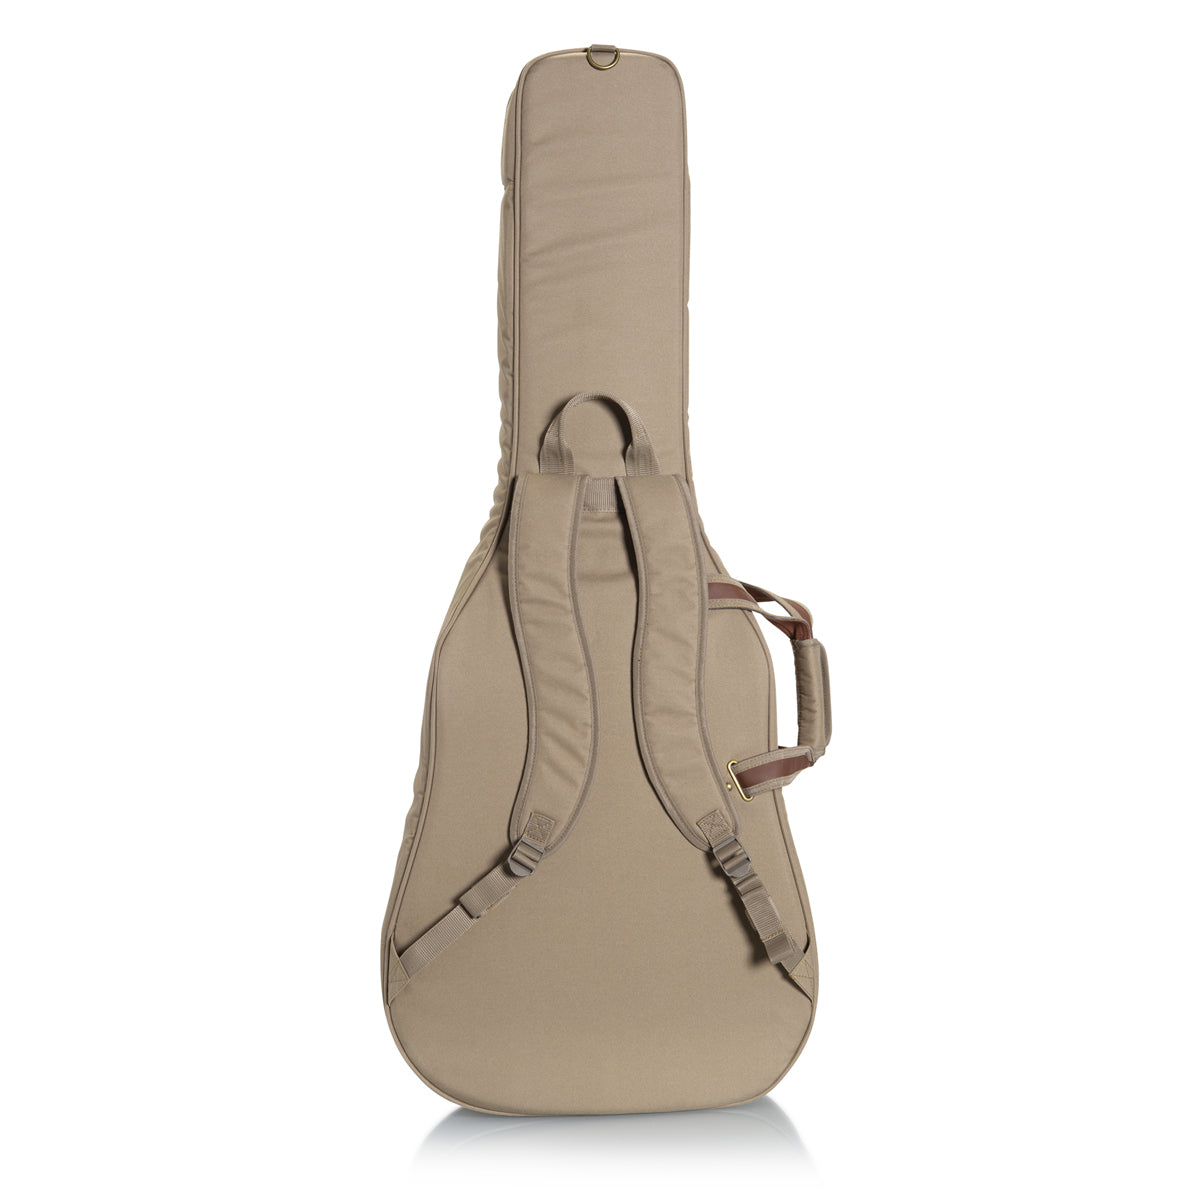 Levy's Deluxe Gig Bag for Electric Guitars - Tan